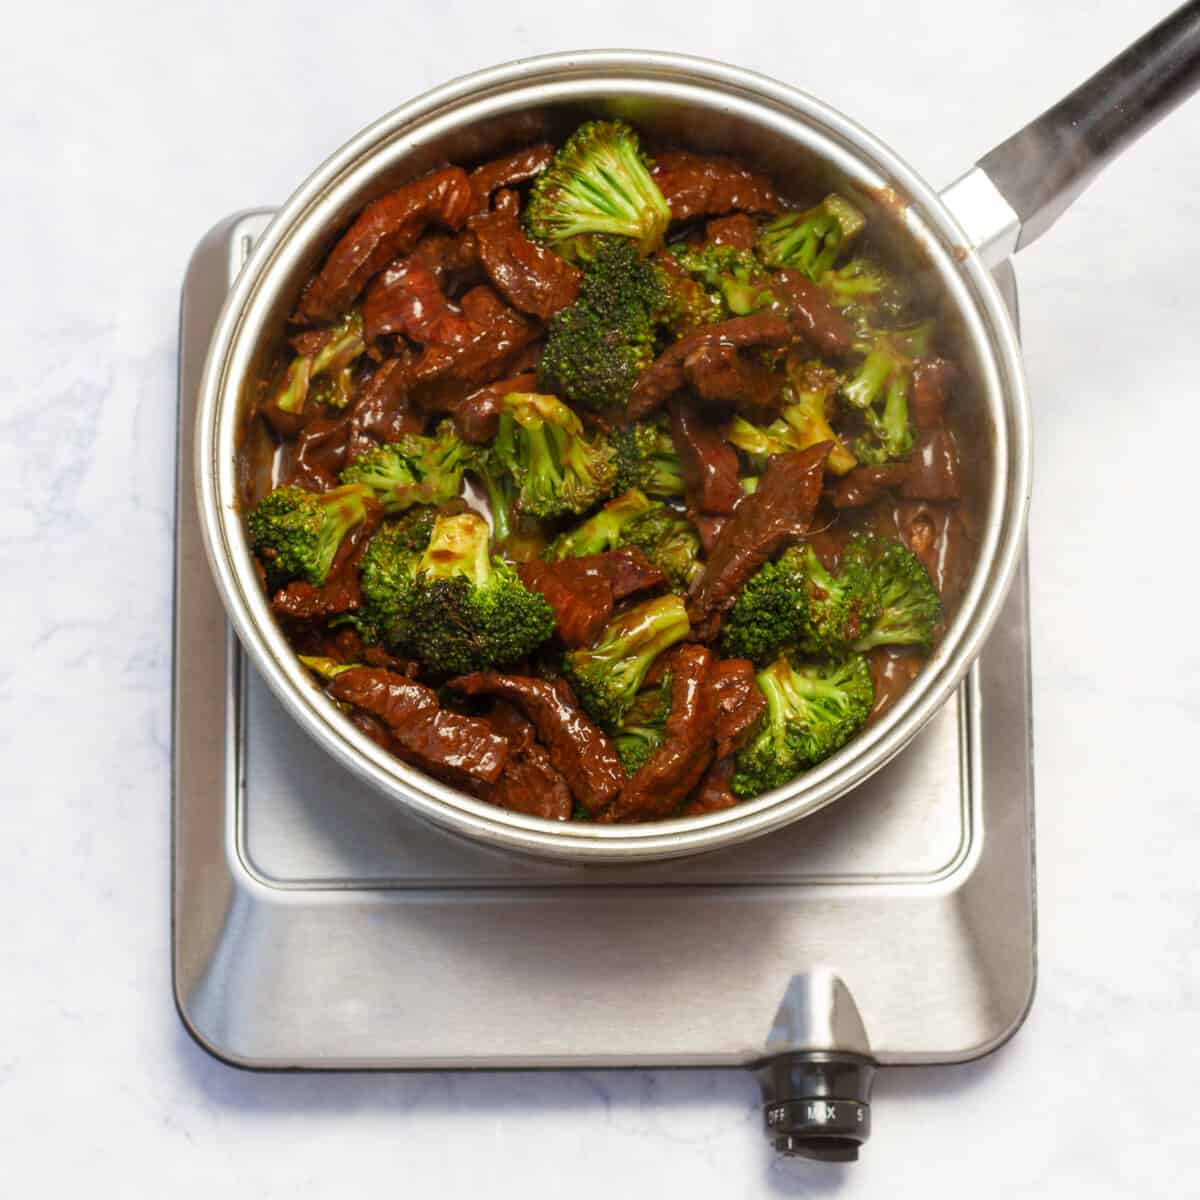 cooking beef in the skillet, along with the blanched broccoli florets